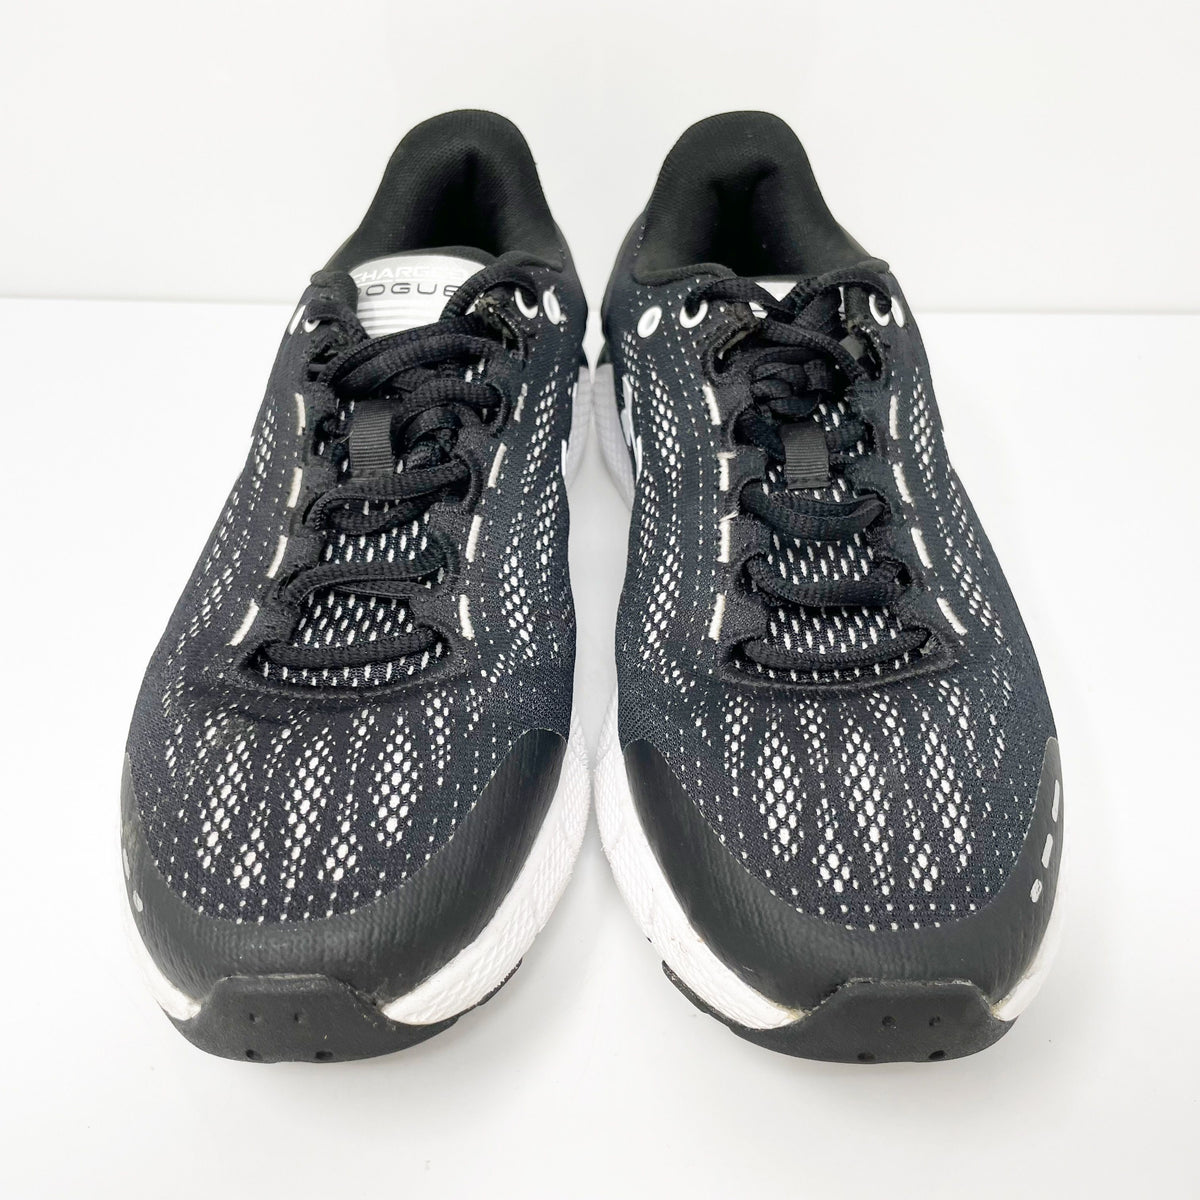 Under Armour Womens Charged Rogue 3021247-002 Black Running Shoes Snea ...